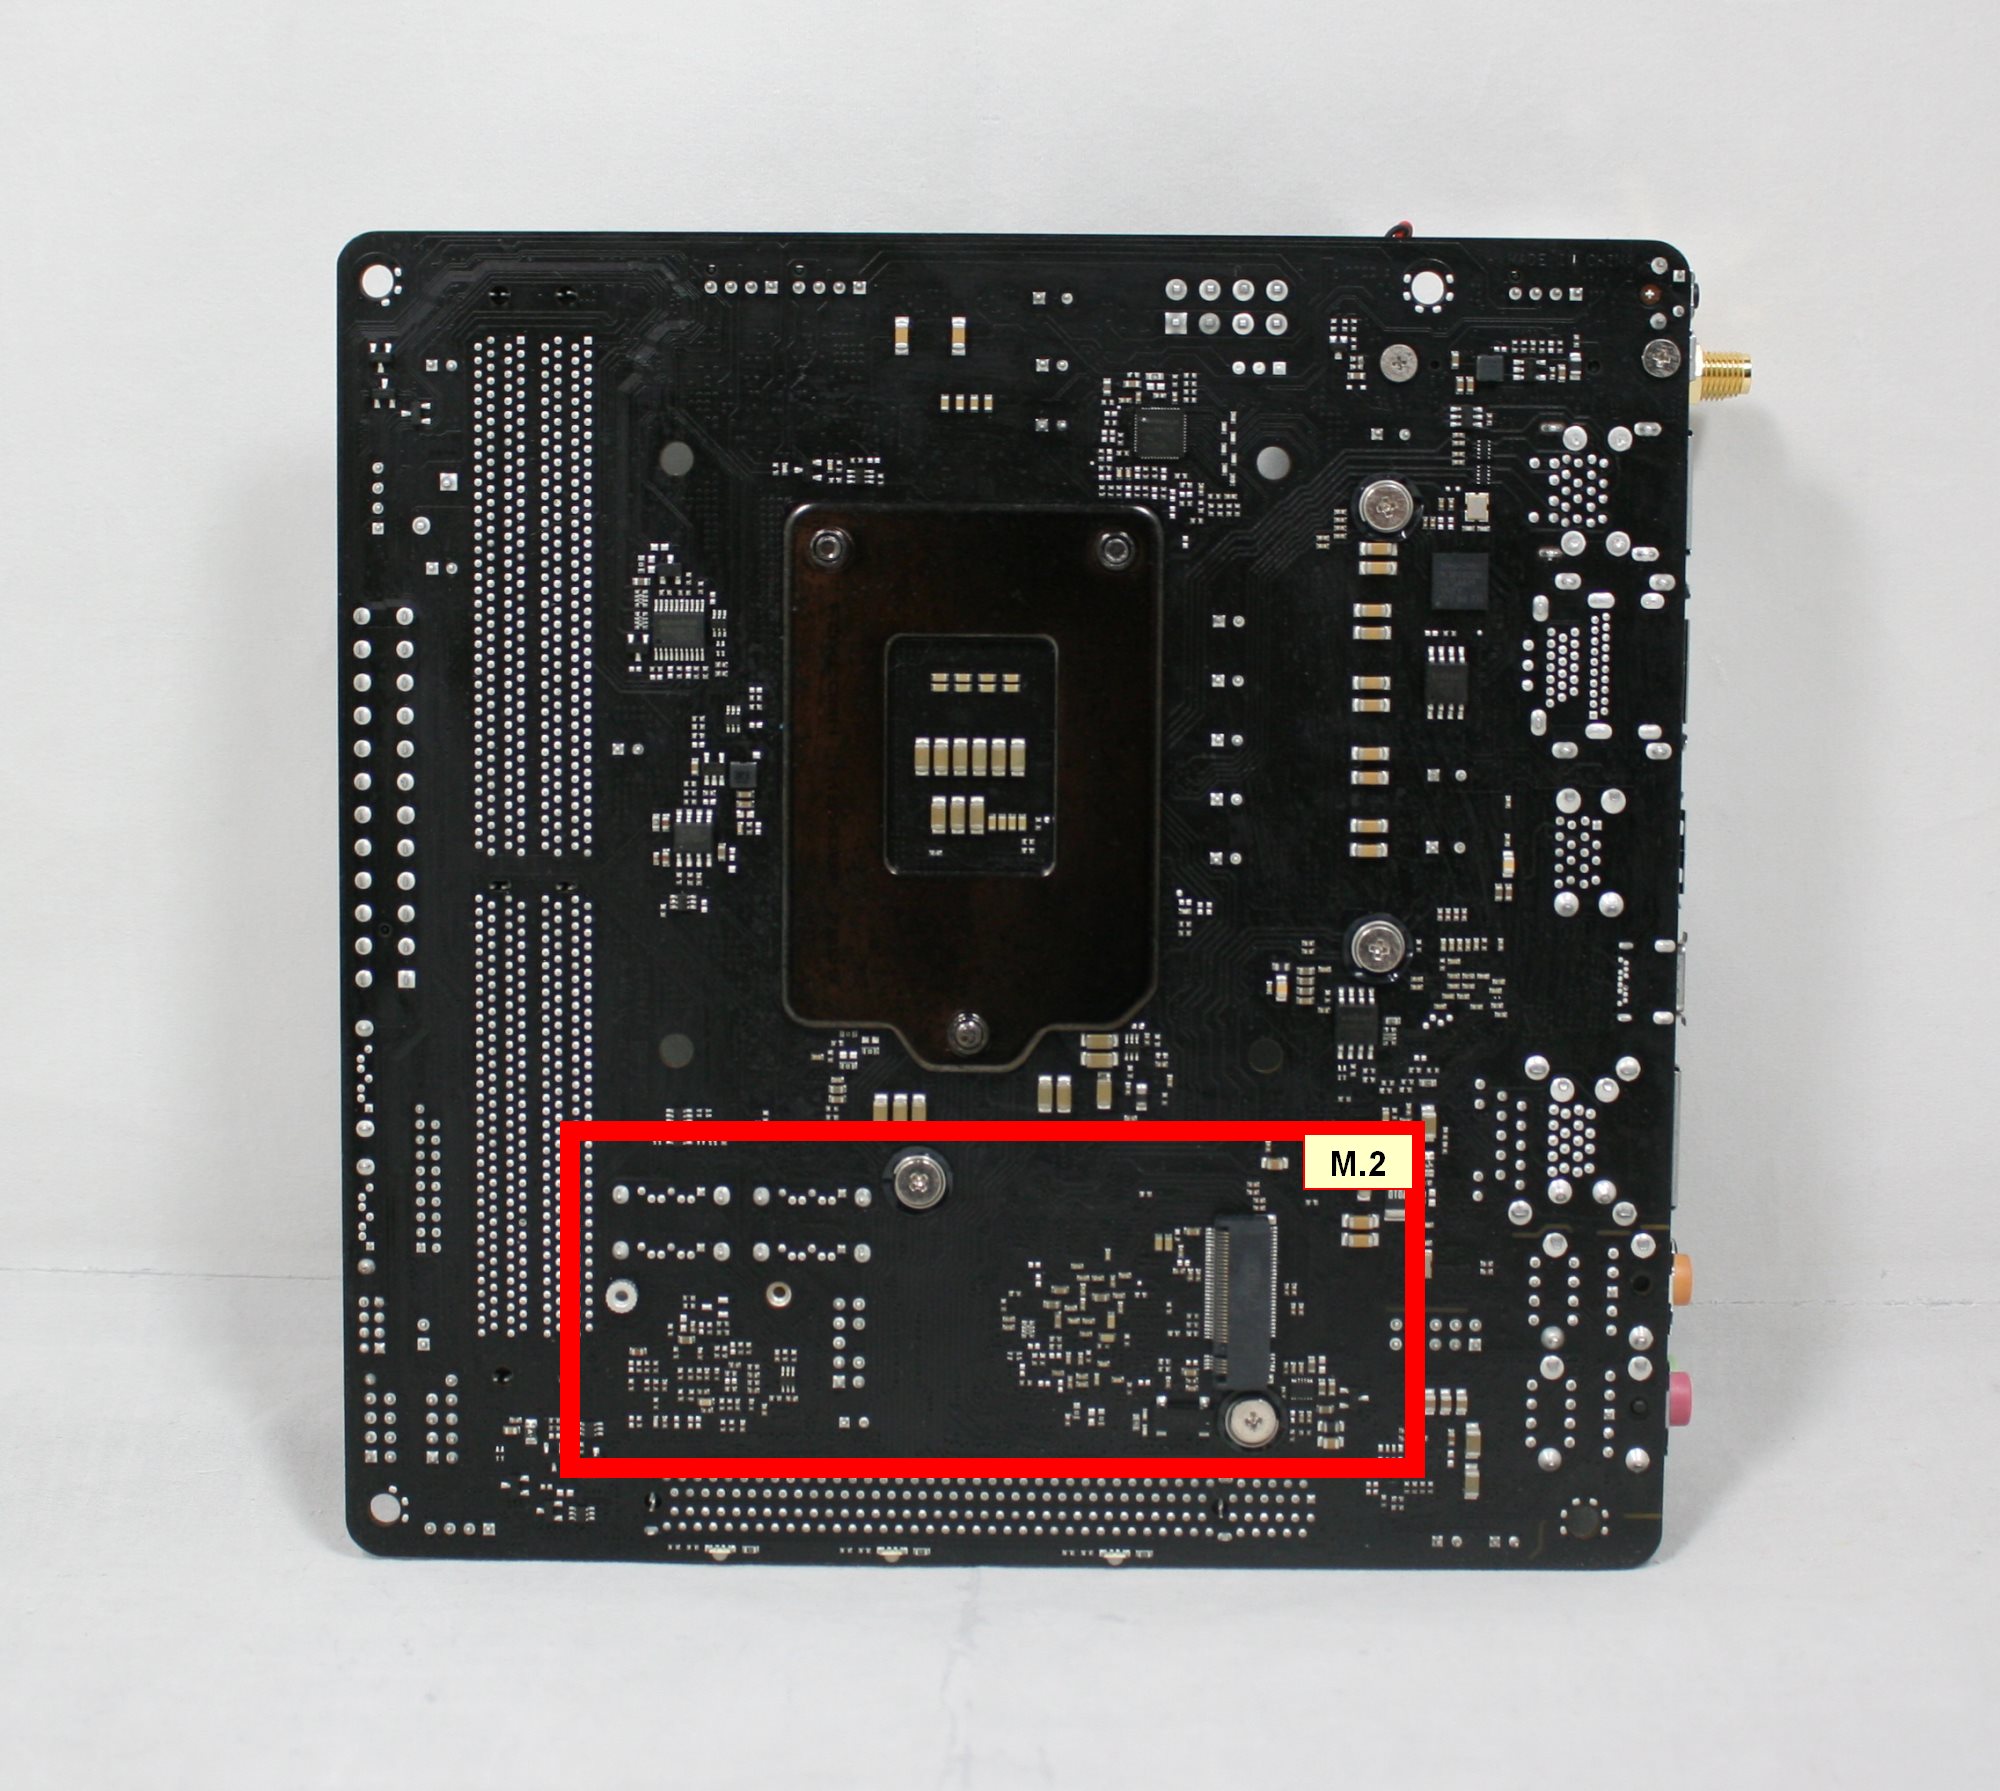 Virus Daggry Faldgruber Visual Inspection - The ASRock Z370 Gaming-ITX/ac Motherboard Review:  Mini-ITX with Thunderbolt 3